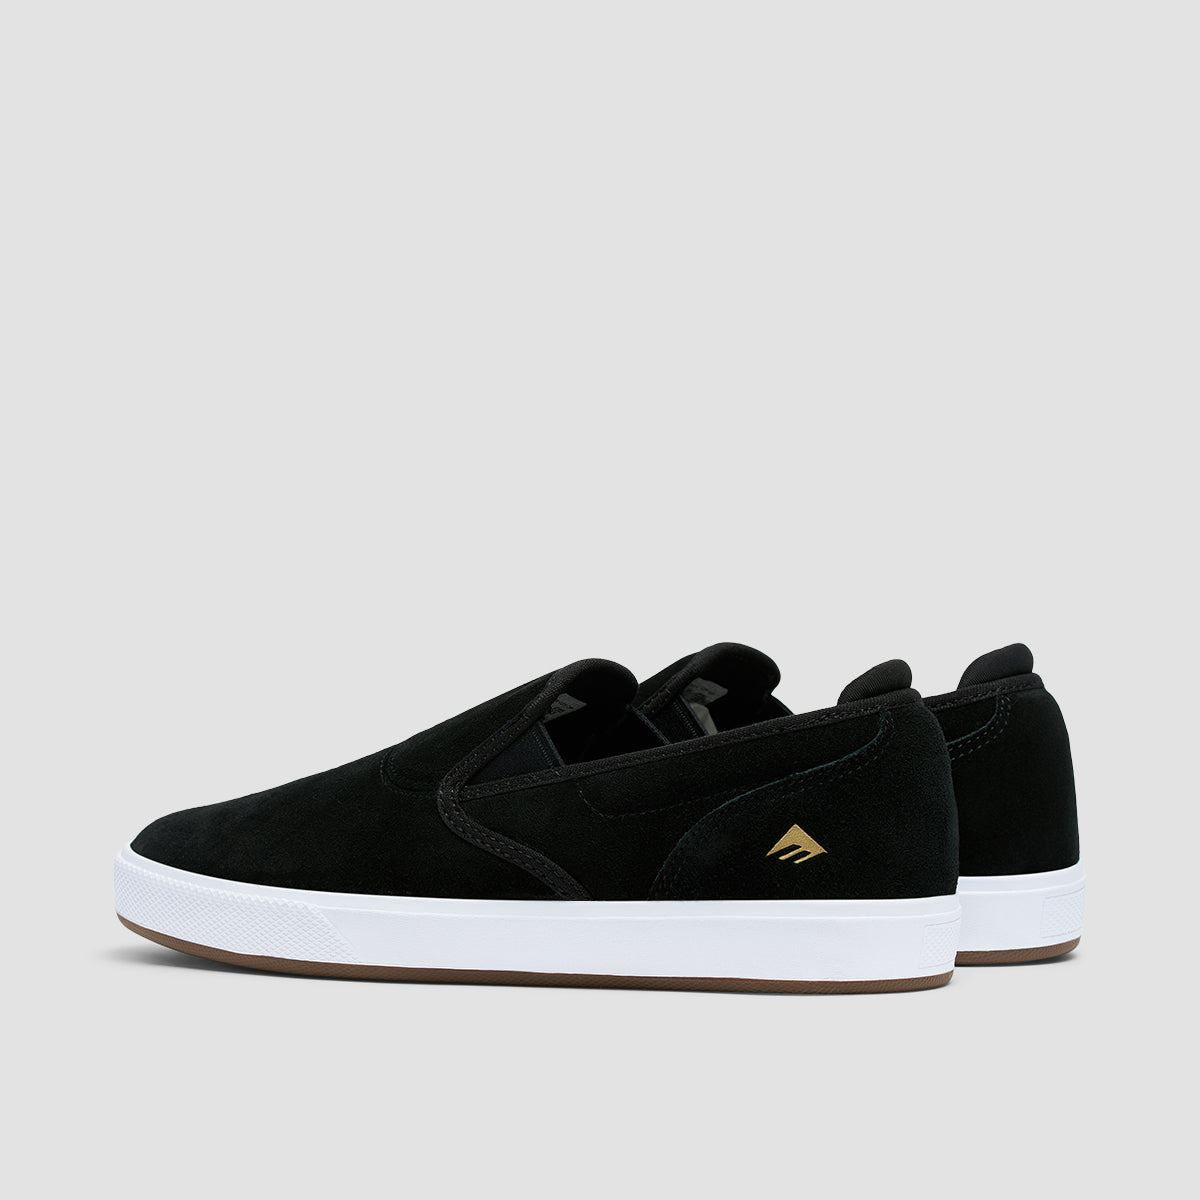 Emerica Wino G6 Cup Slip On Shoes Black